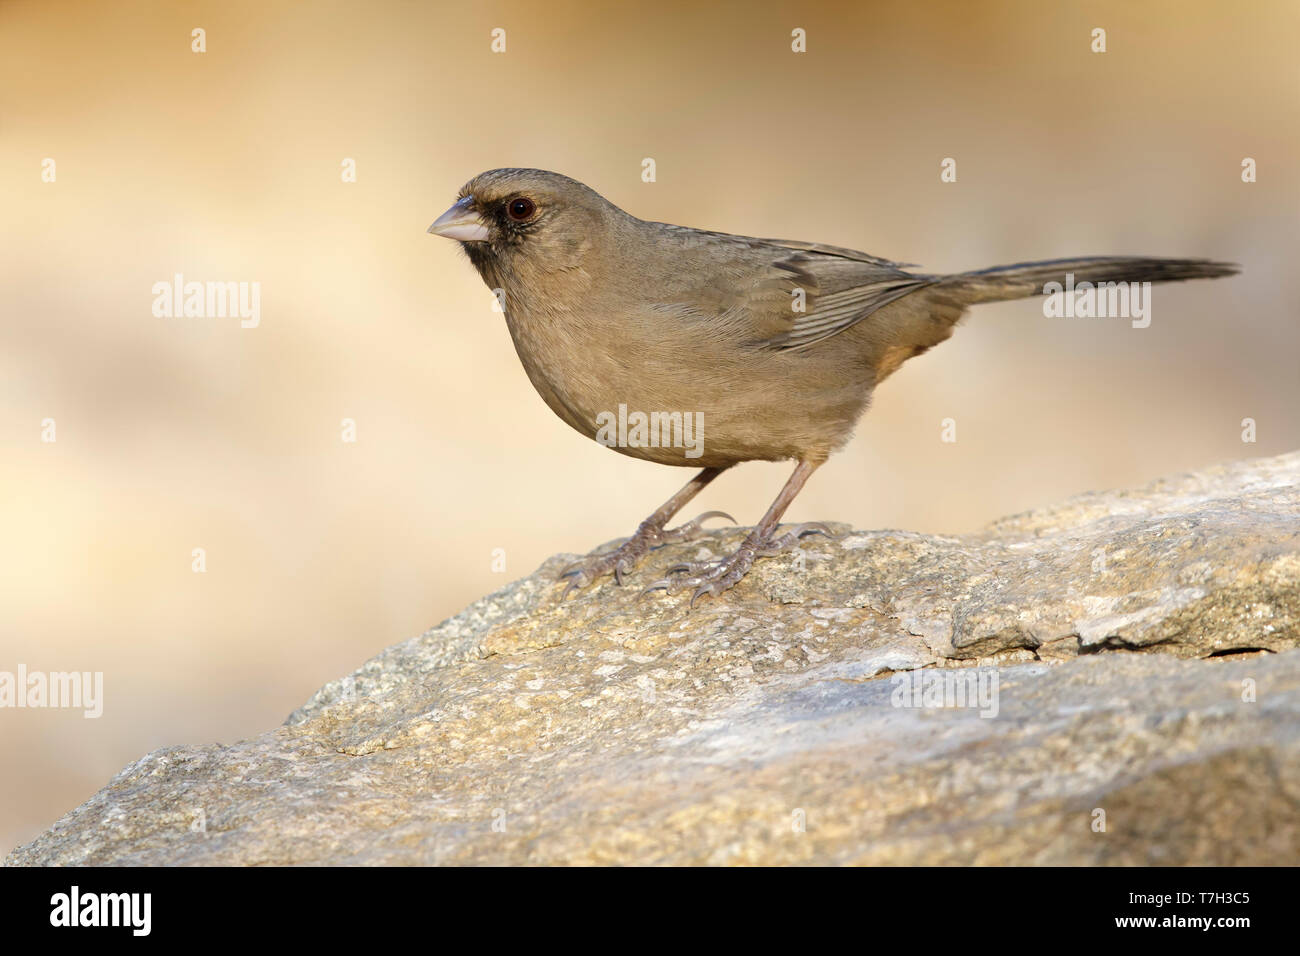 Adult Abert's Towhee (Melozone aberti) perched on a rock in Maricopa Co., Arizona, United States. Stock Photo